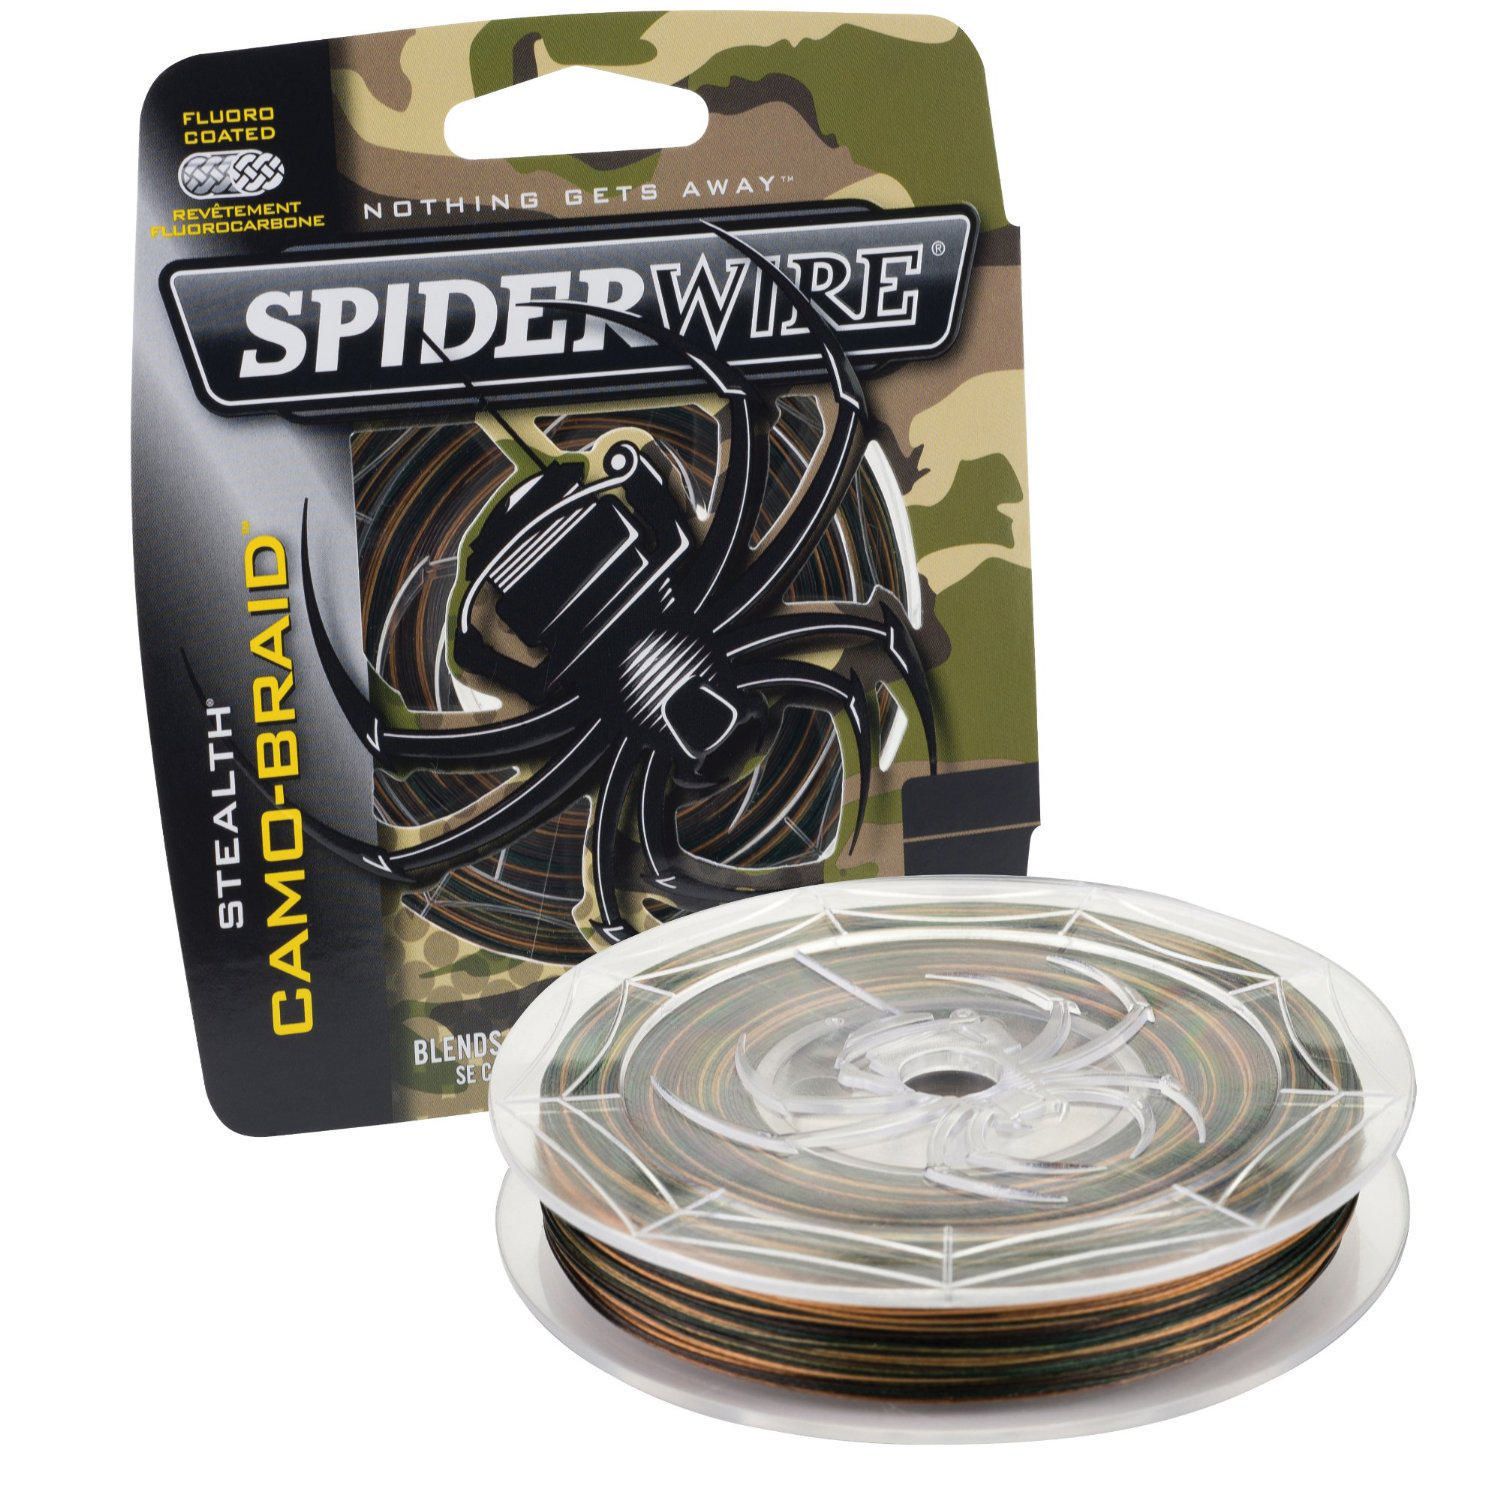 Spiderwire Stealth Braid Fishing Line, 50 lb, super strong with thin  diameter for smooth and quiet performance. 